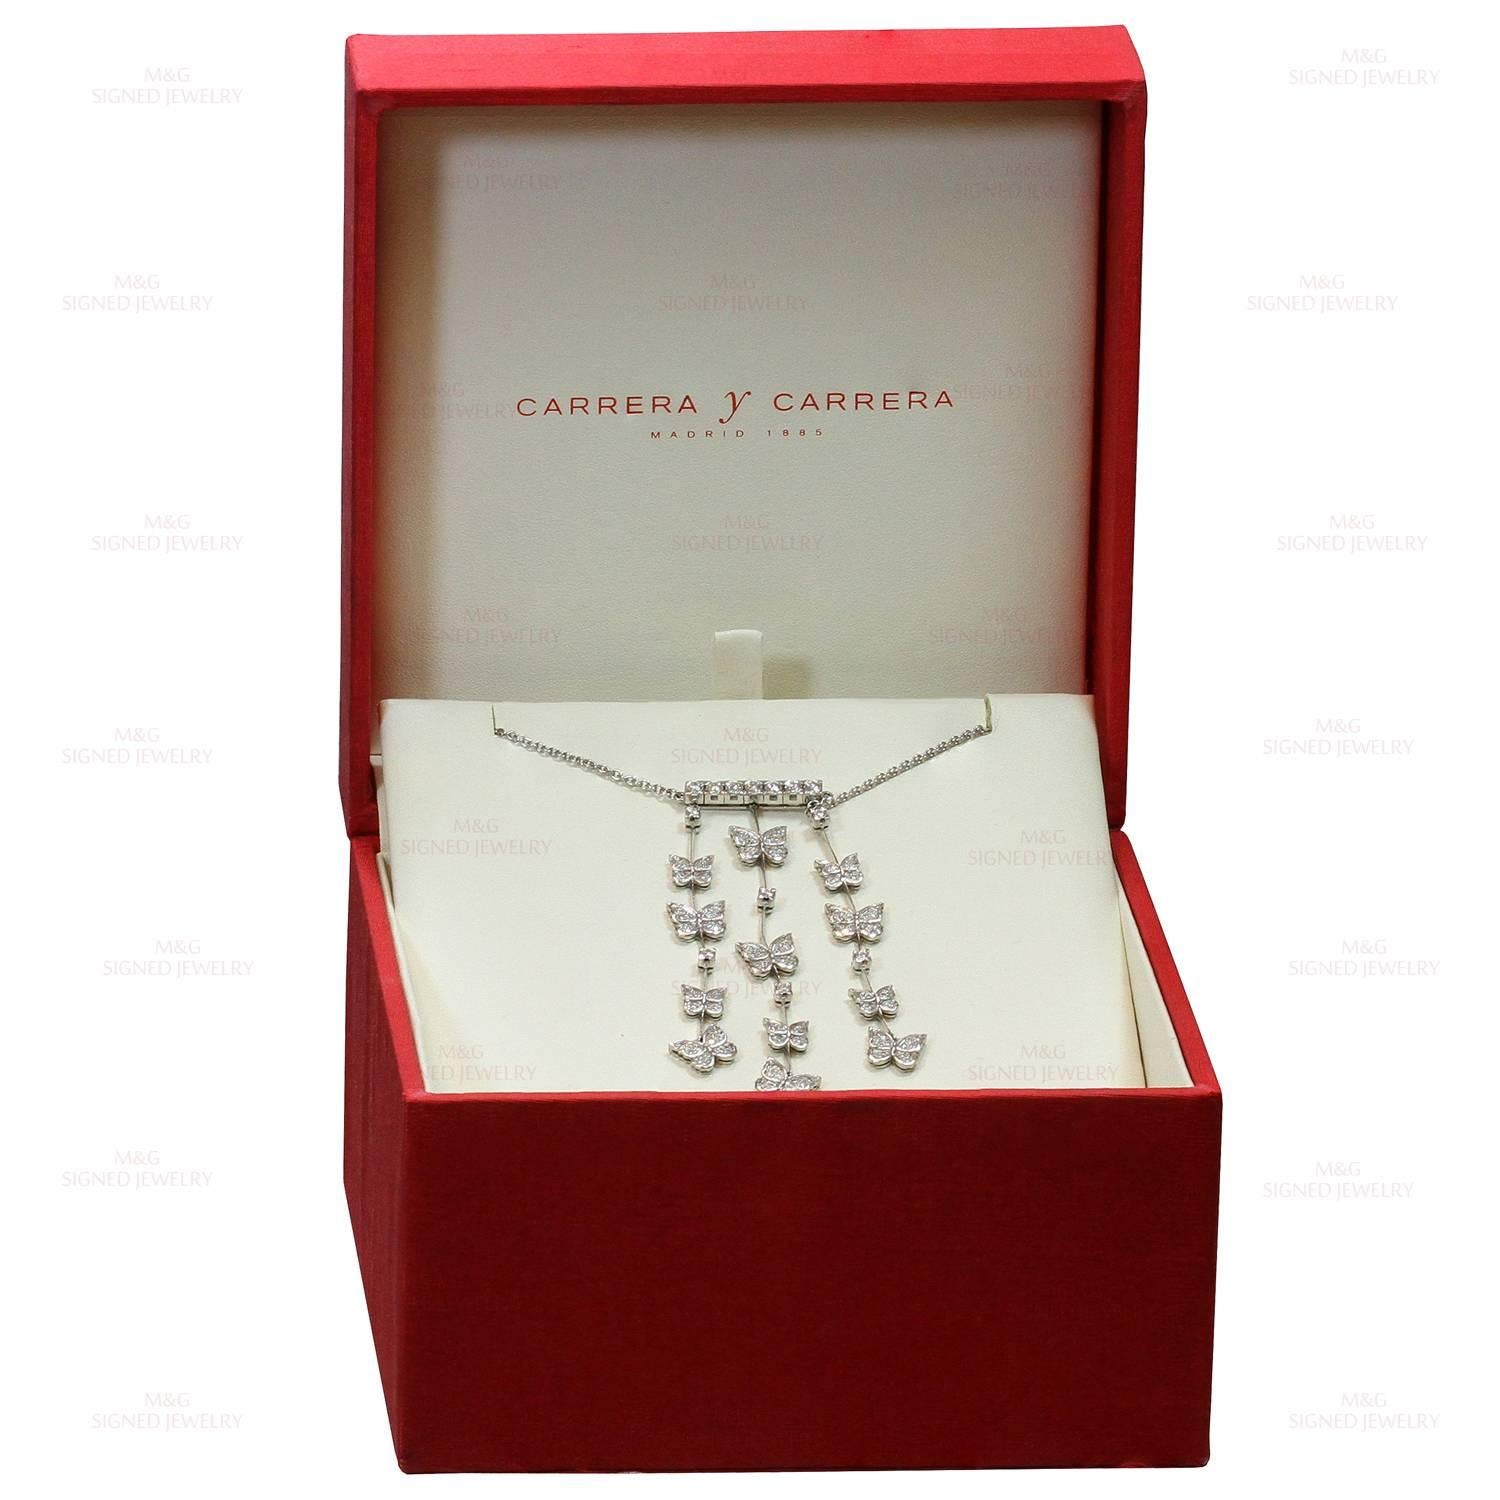 This exquisite necklace from the Butterflies collection by Carrera Y Carerra is crafted in 18k white gold and features a stunning pendant drop set with 151 diamonds of an estimated 2.05 carats. Made in Spain circa 2000s. Measurements: 0.98